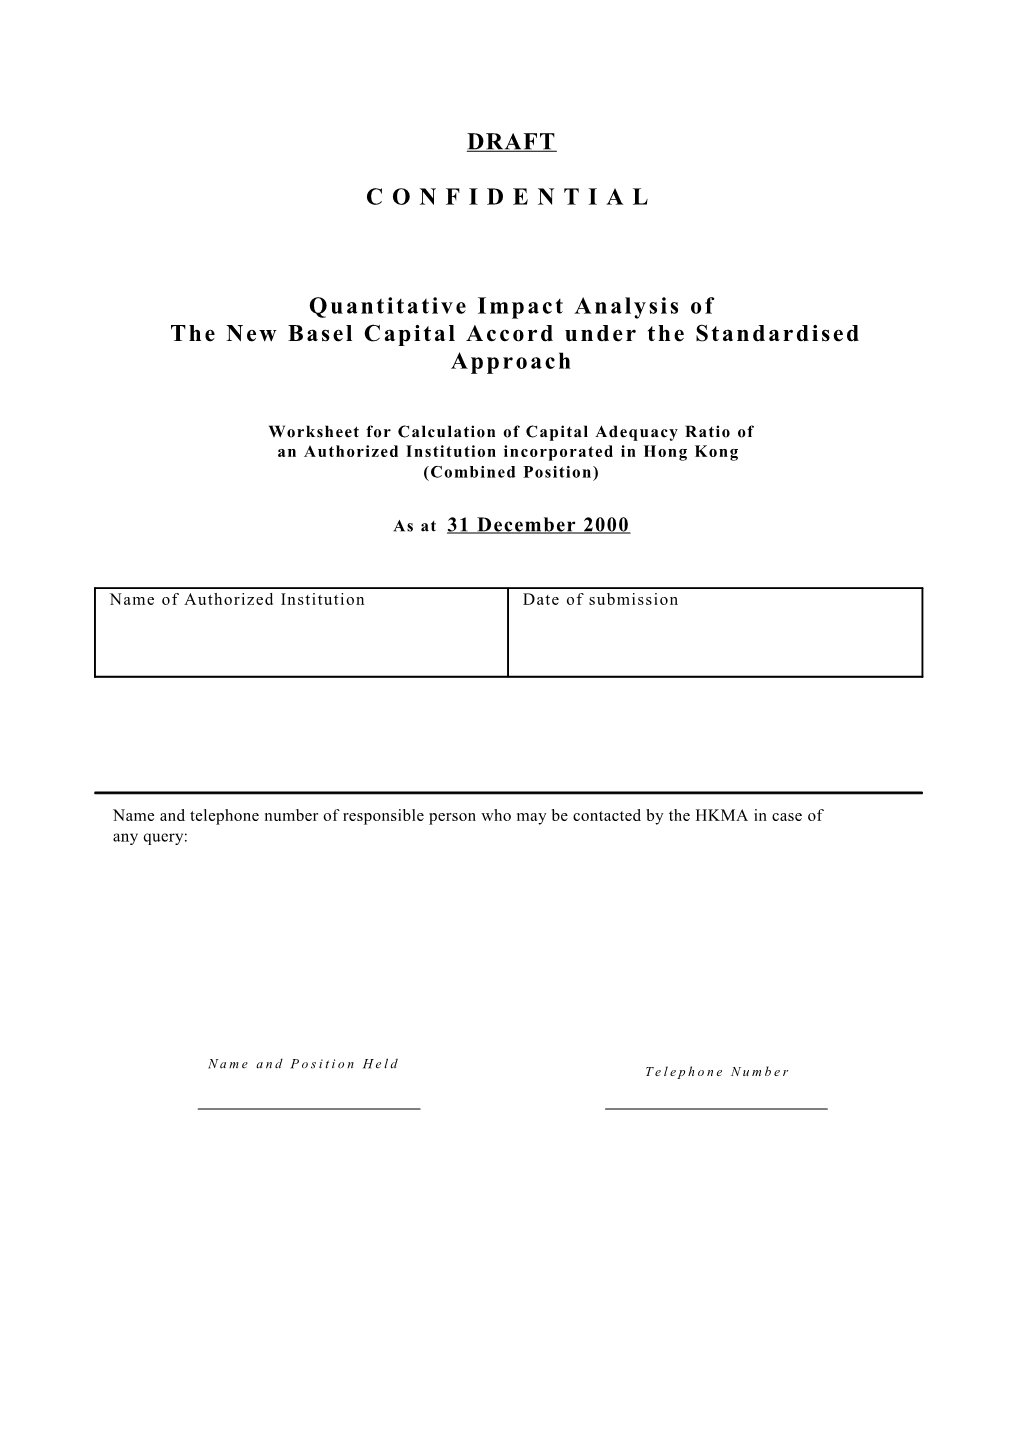 The New Basel Capital Accord Under the Standardised Approach